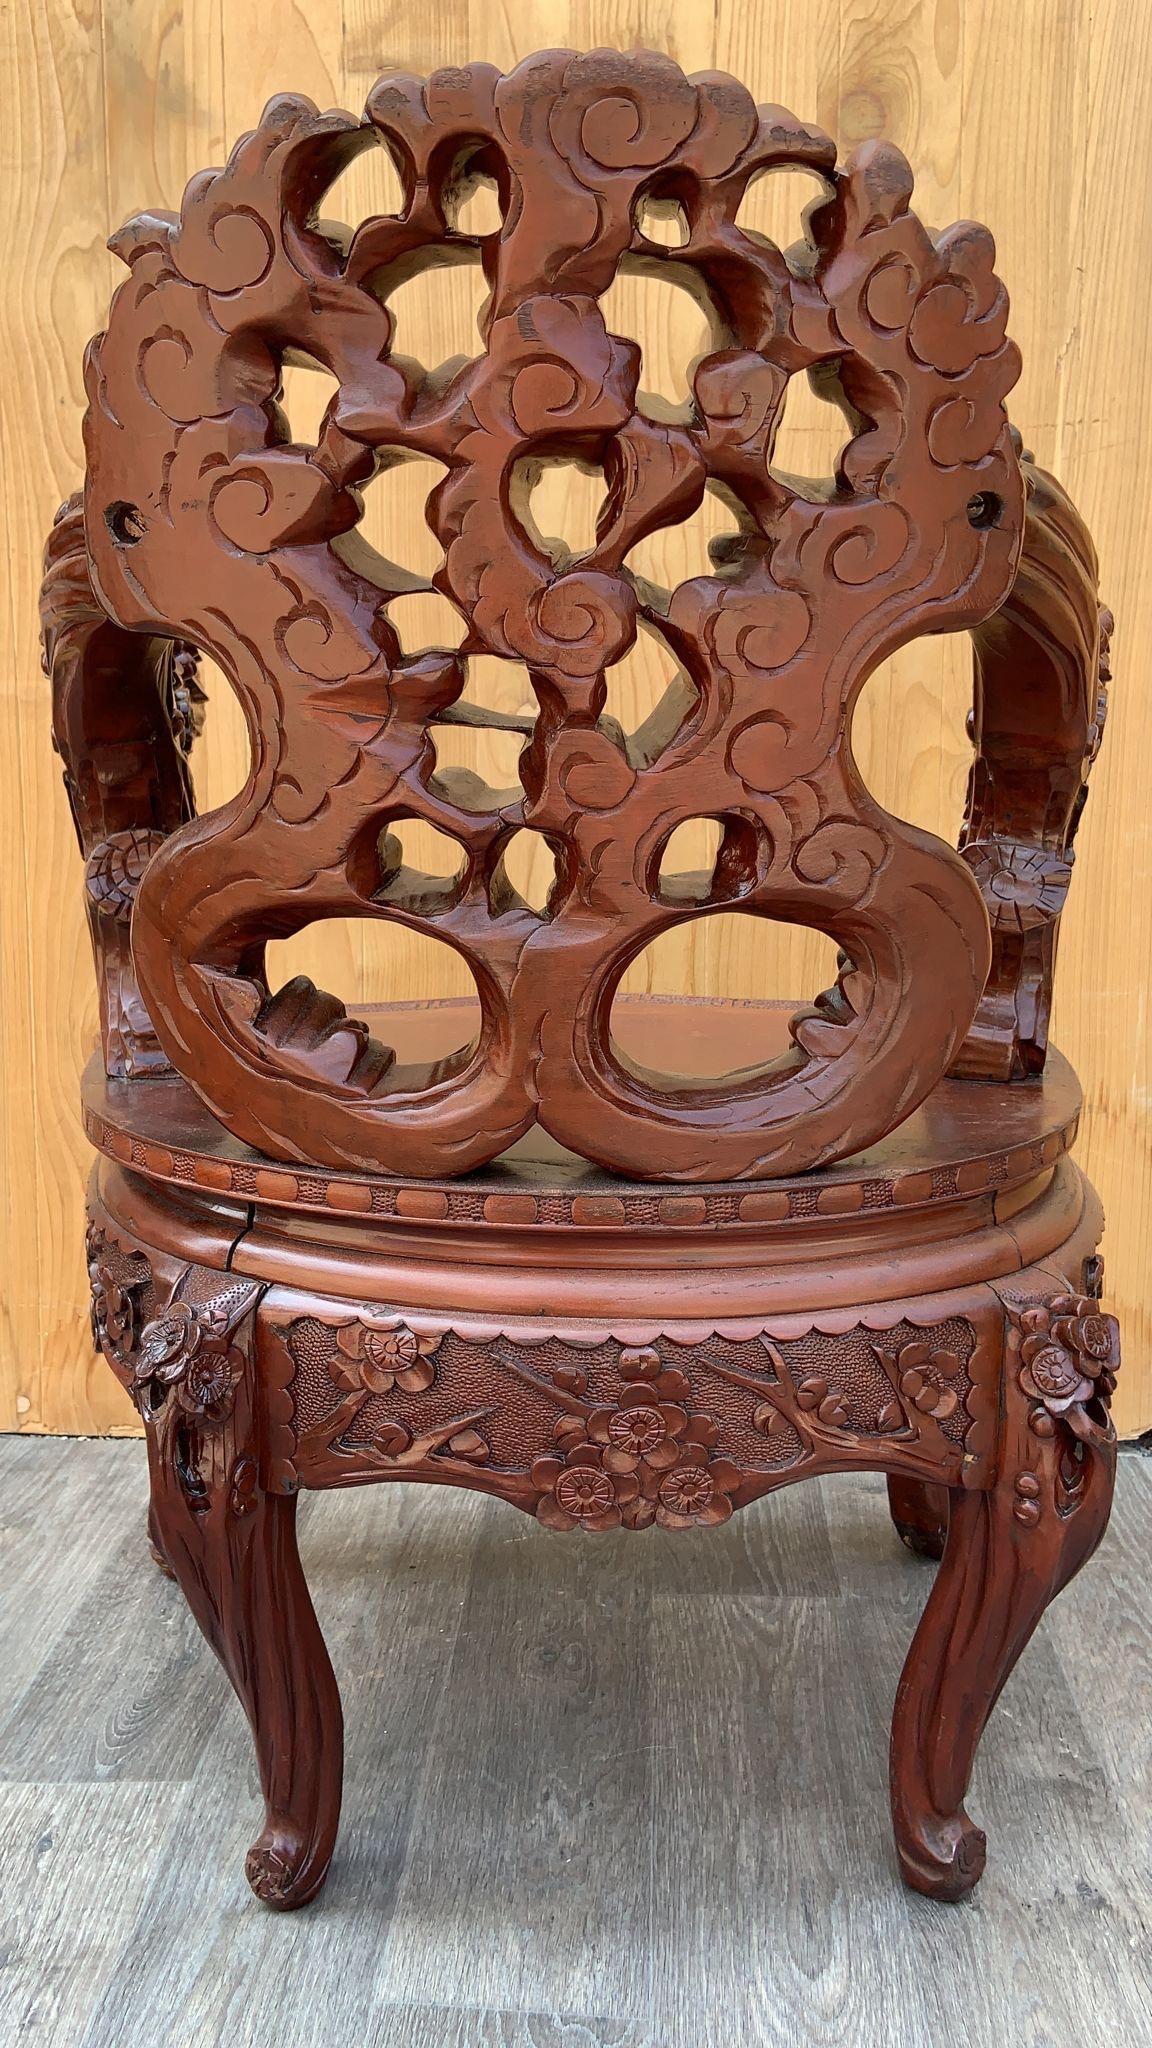 Vintage Japanese Carved Floral Accent Chair

This Vintage Japanese Carved Floral Accent Chair is a stunning piece of furniture!
	1.	Carved Wood: The chair is intricately hand-carved from wood, showcasing exquisite craftsmanship. The carving often